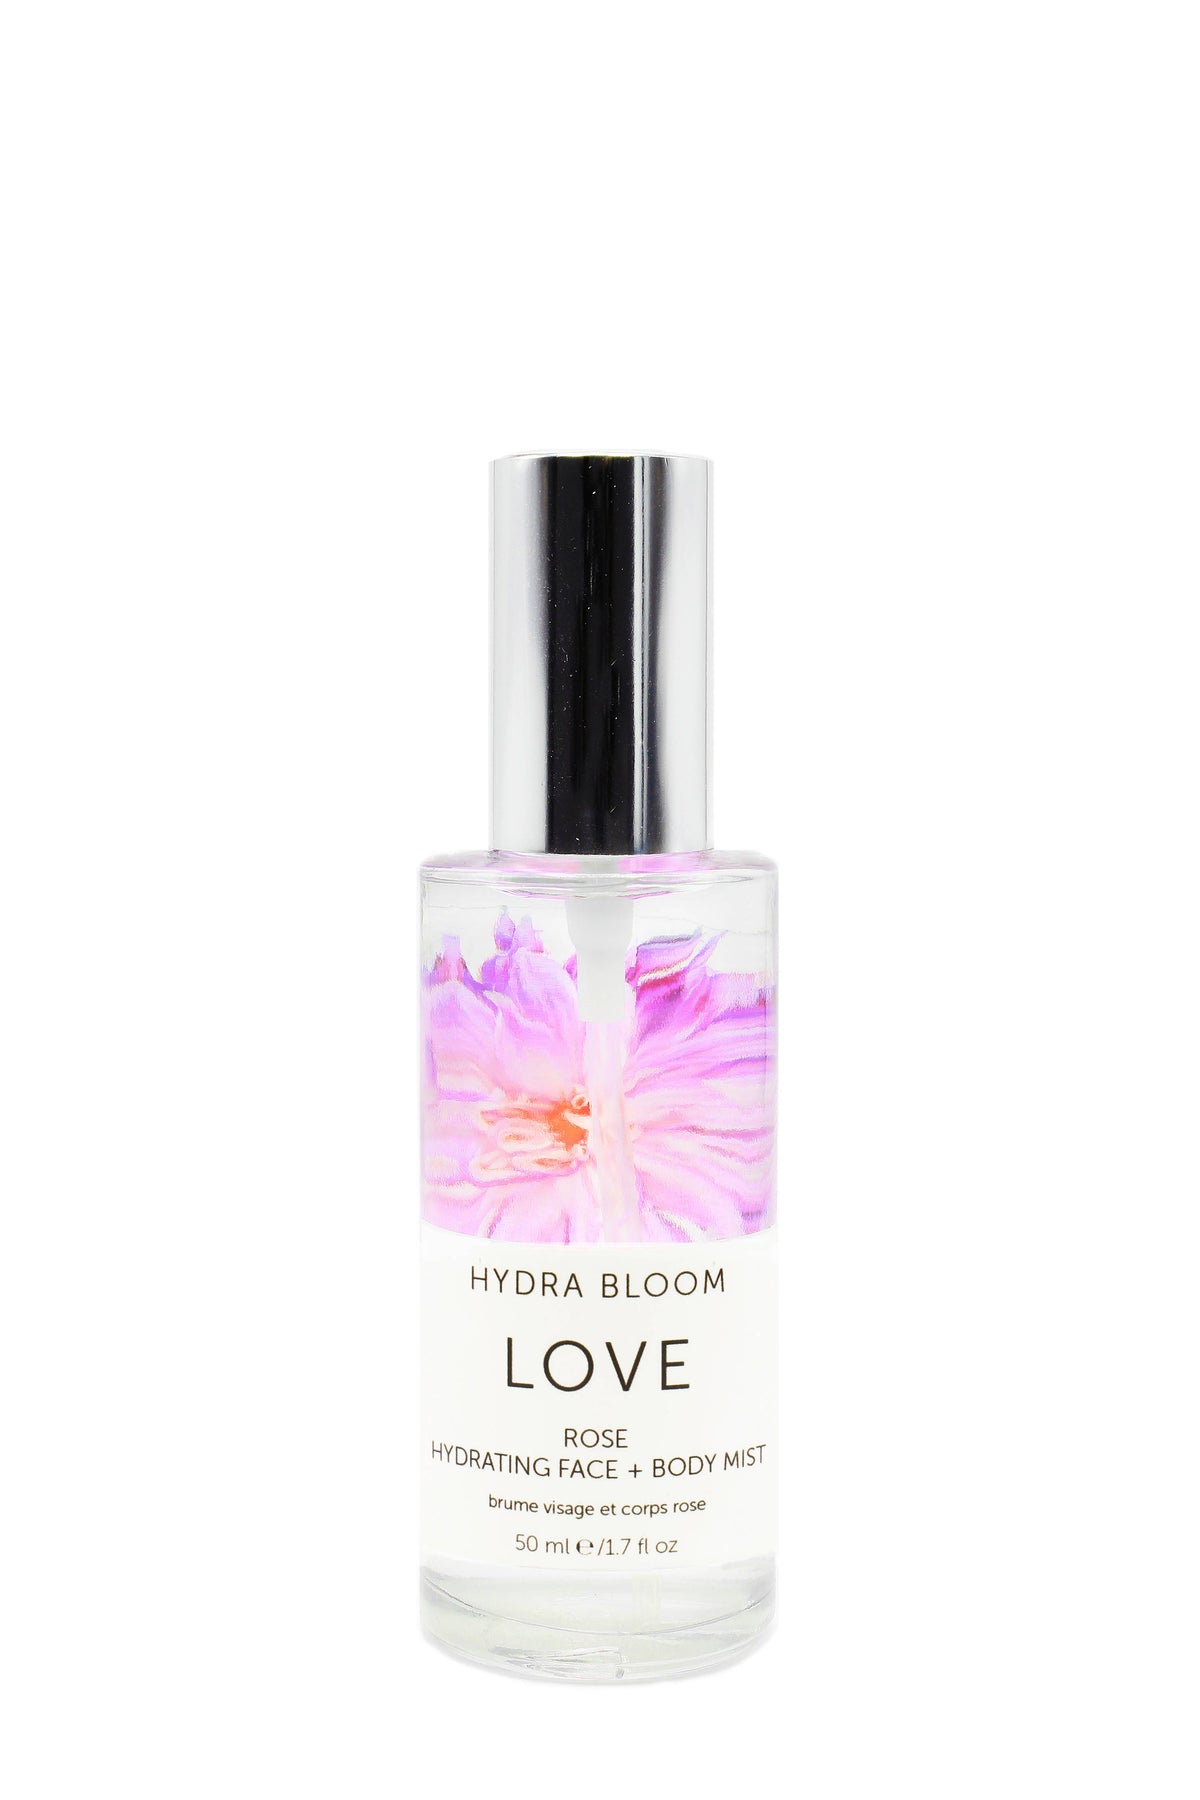 Hydra Bloom Beauty Rose Love Face and Body Mist